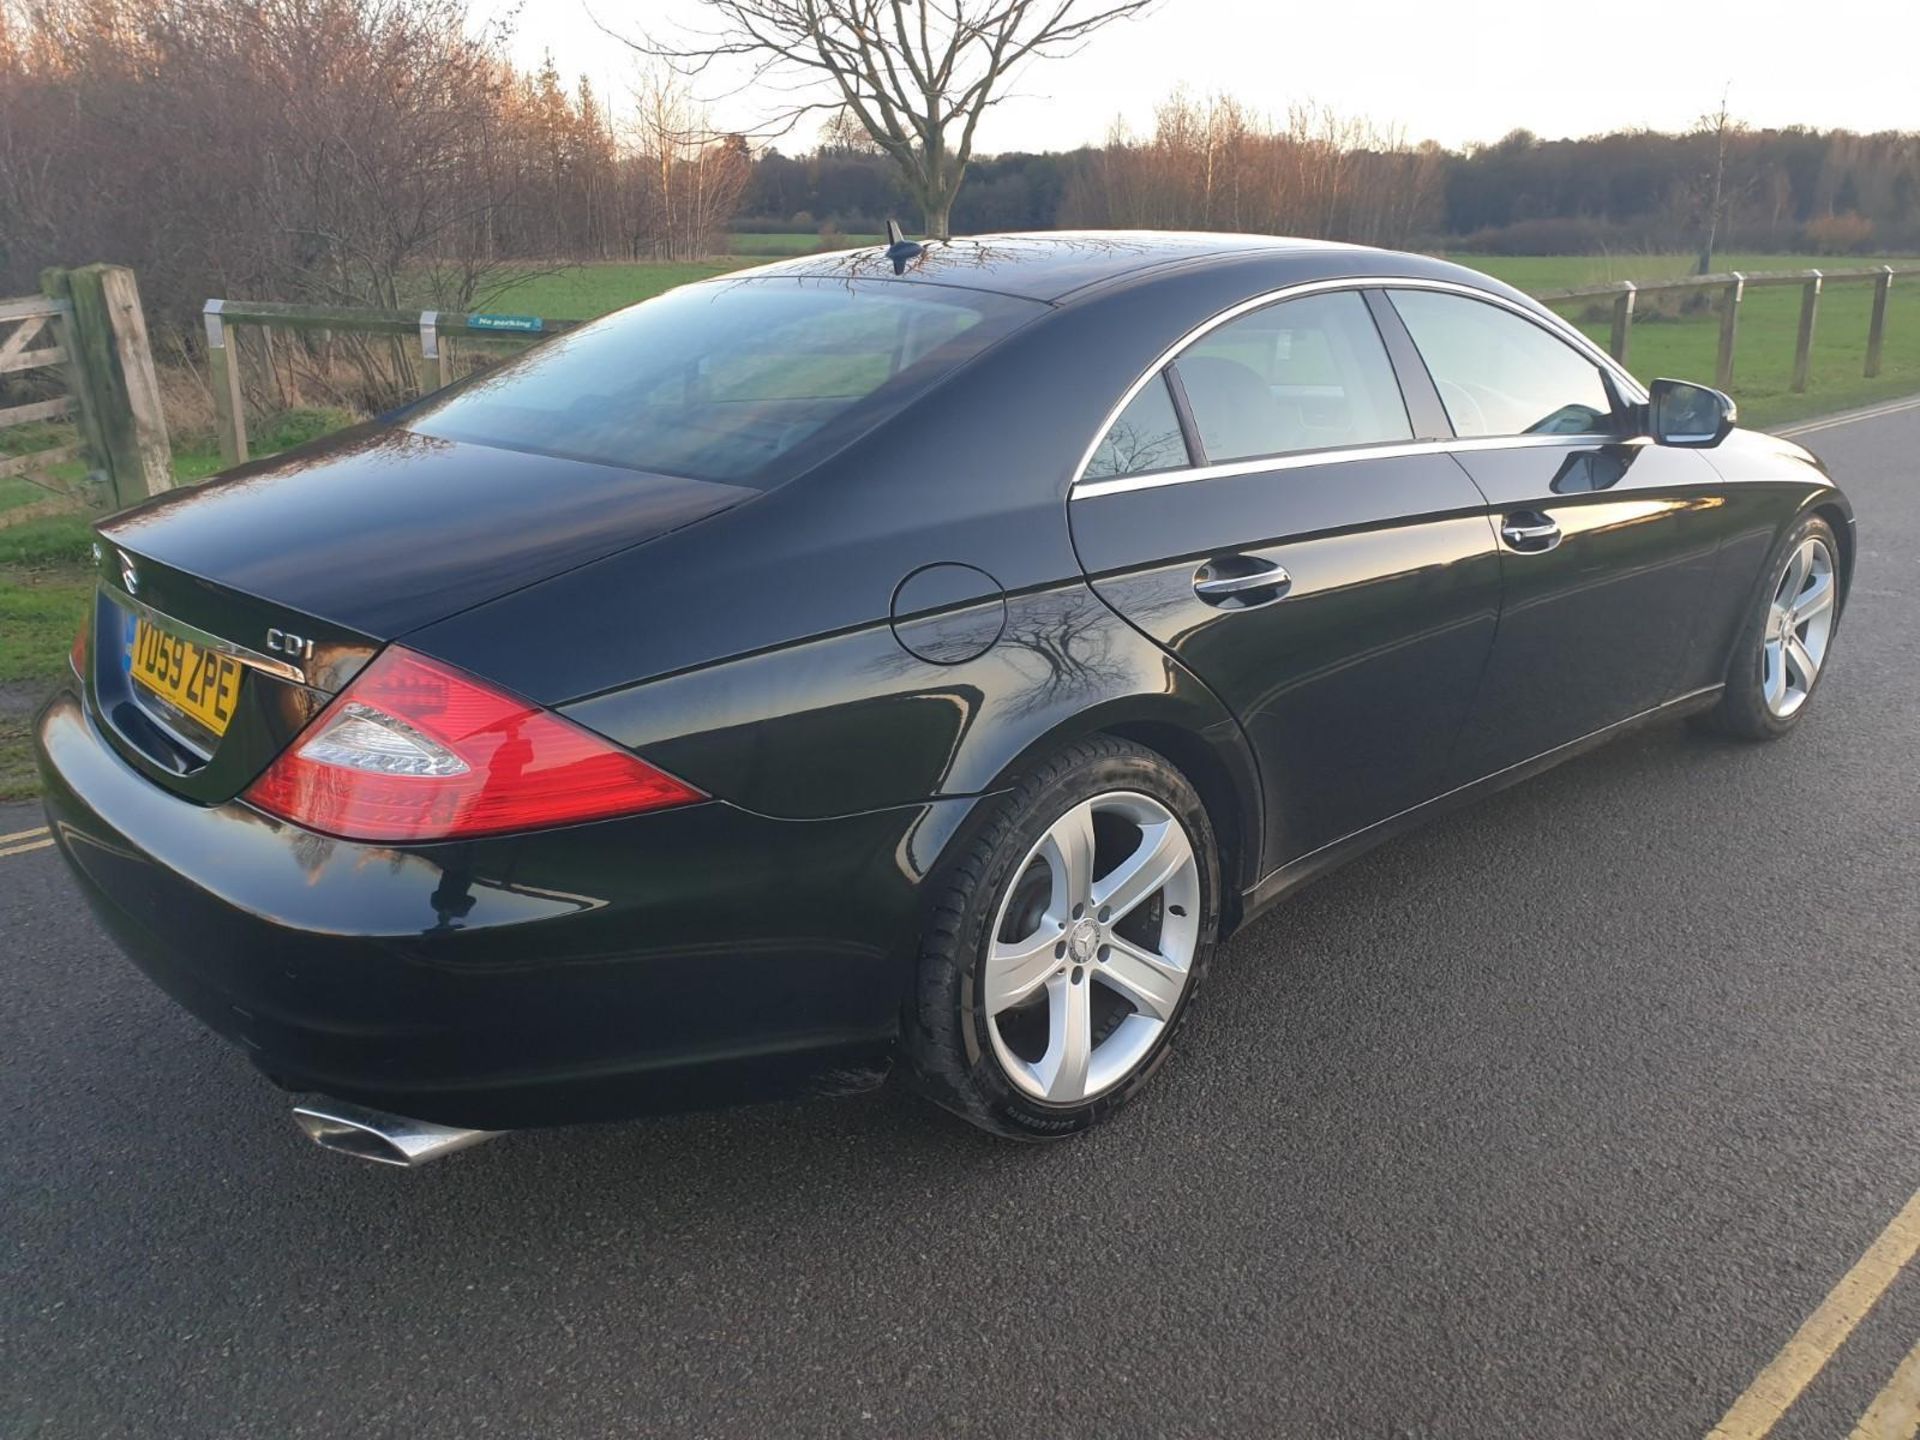 2009/59 REG MERCEDES-BENZ CLS350 CDI AUTO BLACK DIESEL COUPE, SHOWING 2 FORMER KEEPERS *NO VAT* - Image 7 of 12